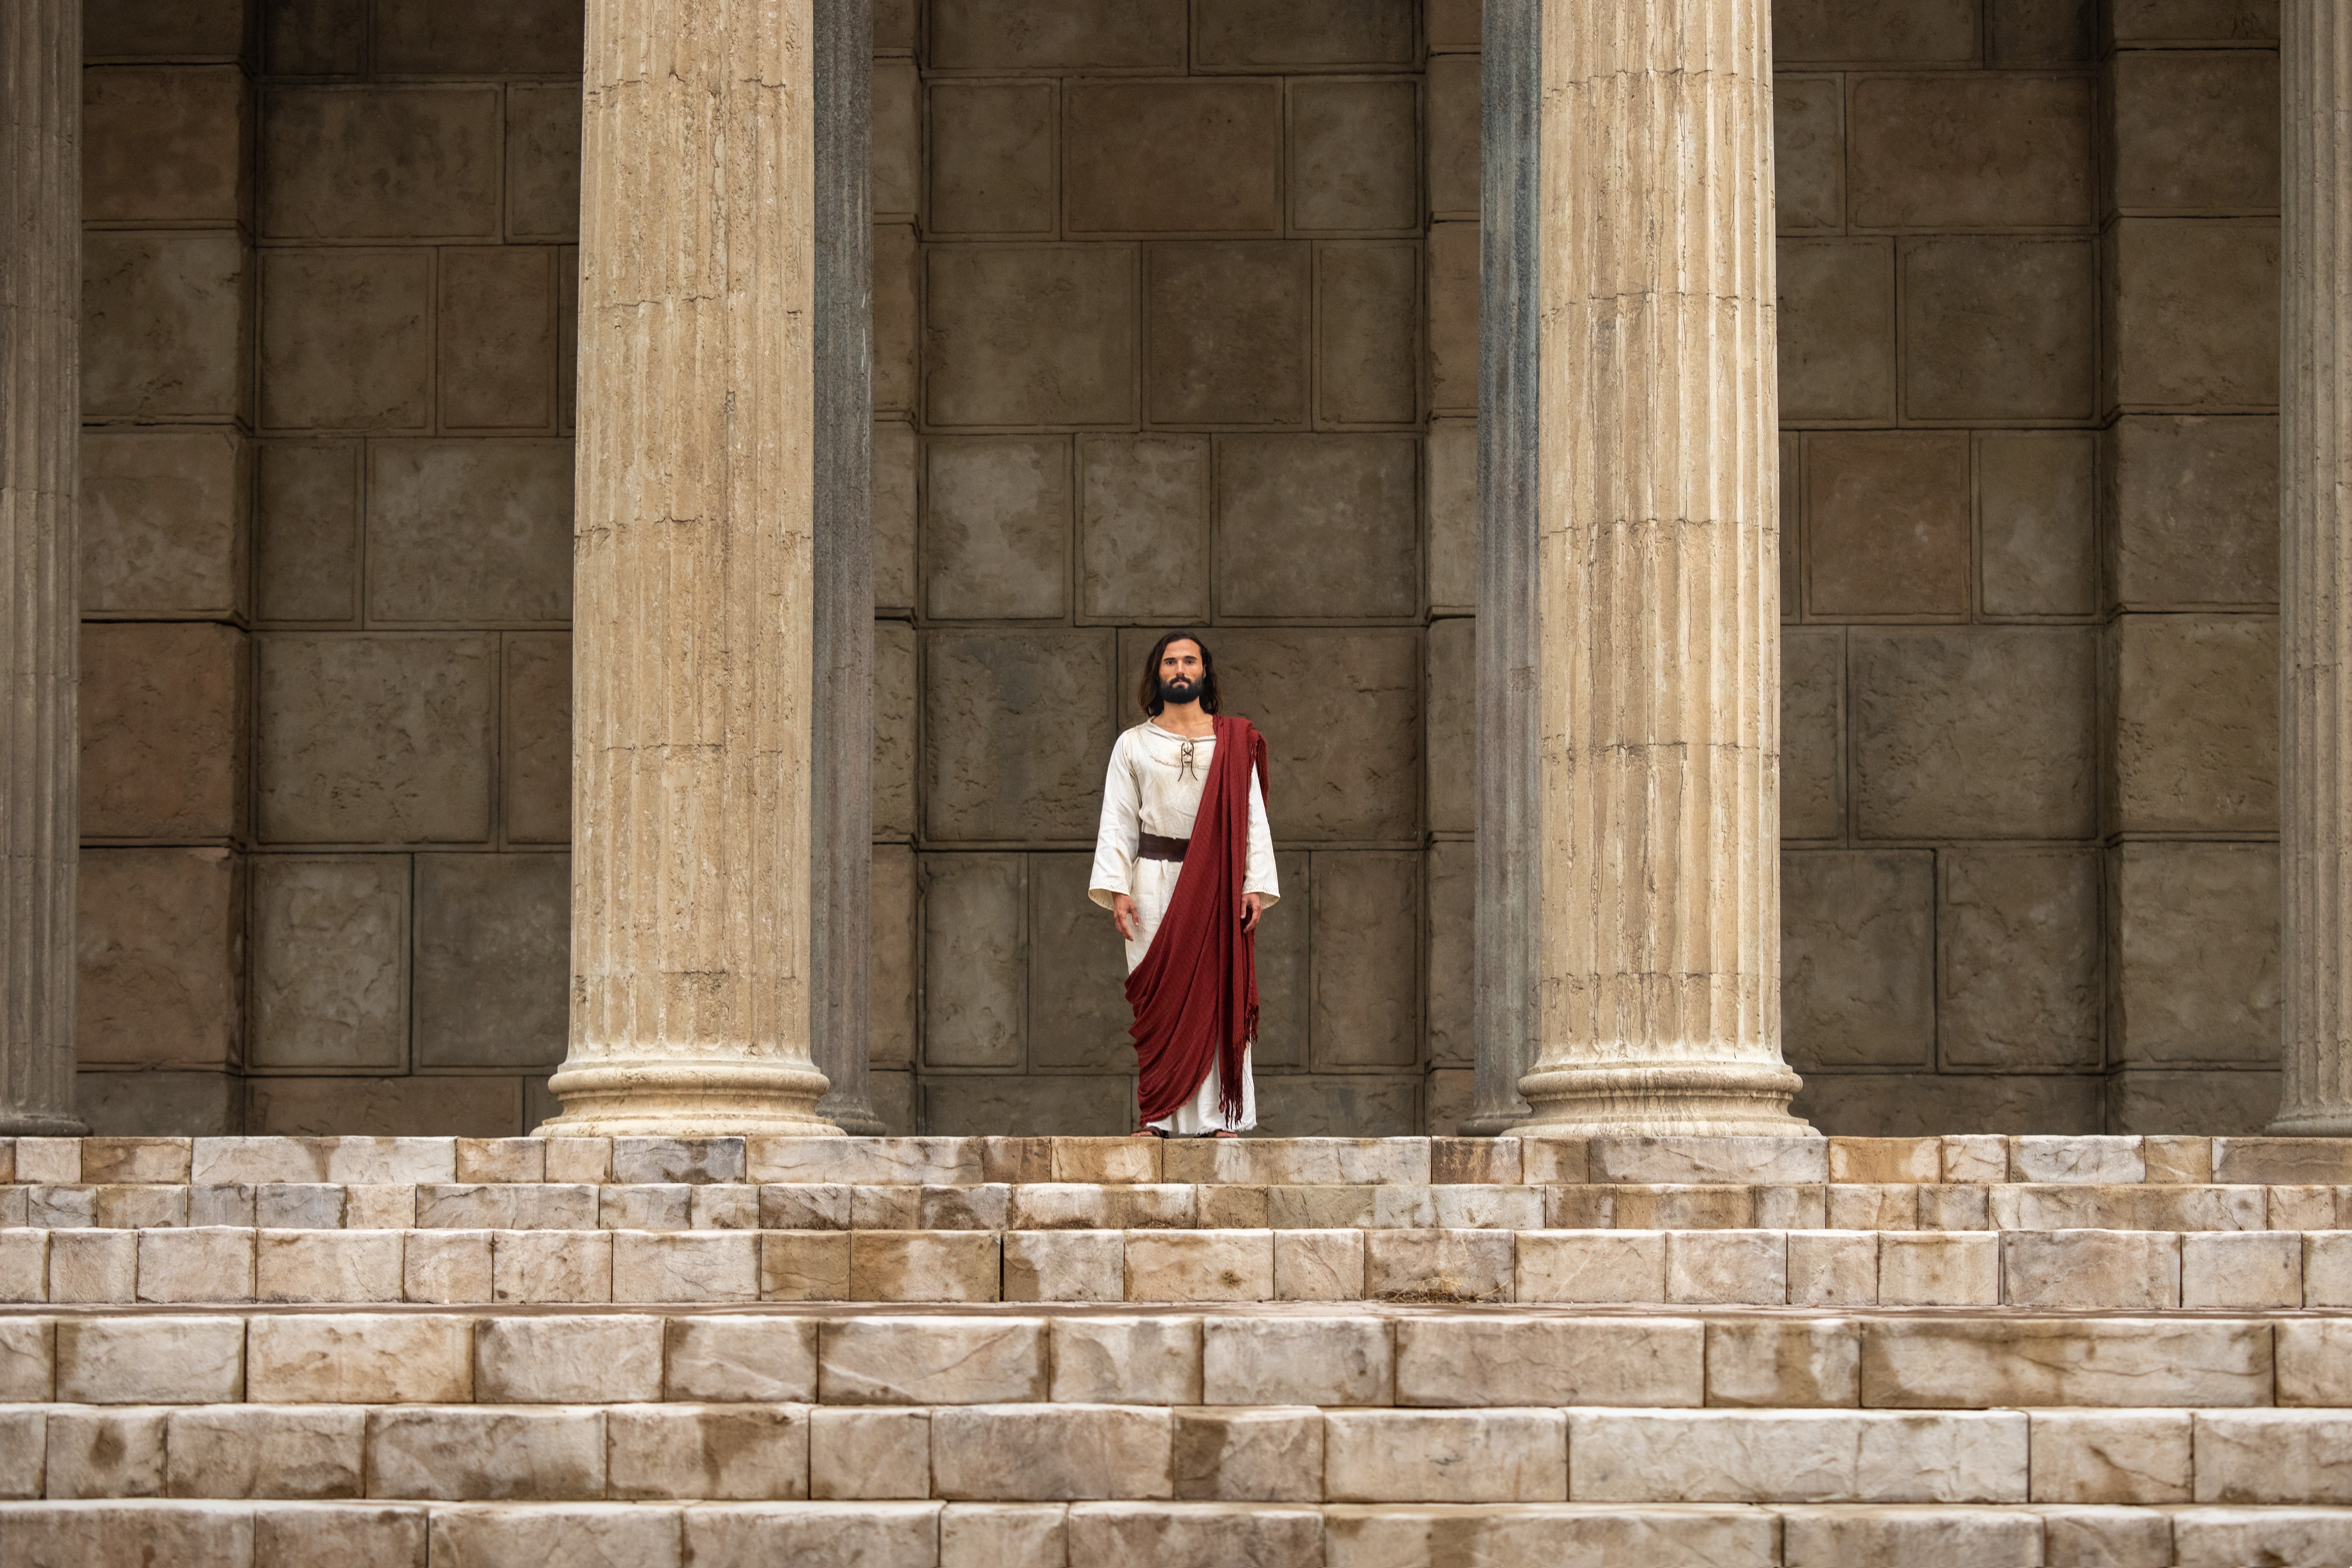 Jesus Christ teaches His apostles and Nephites of "other sheep"